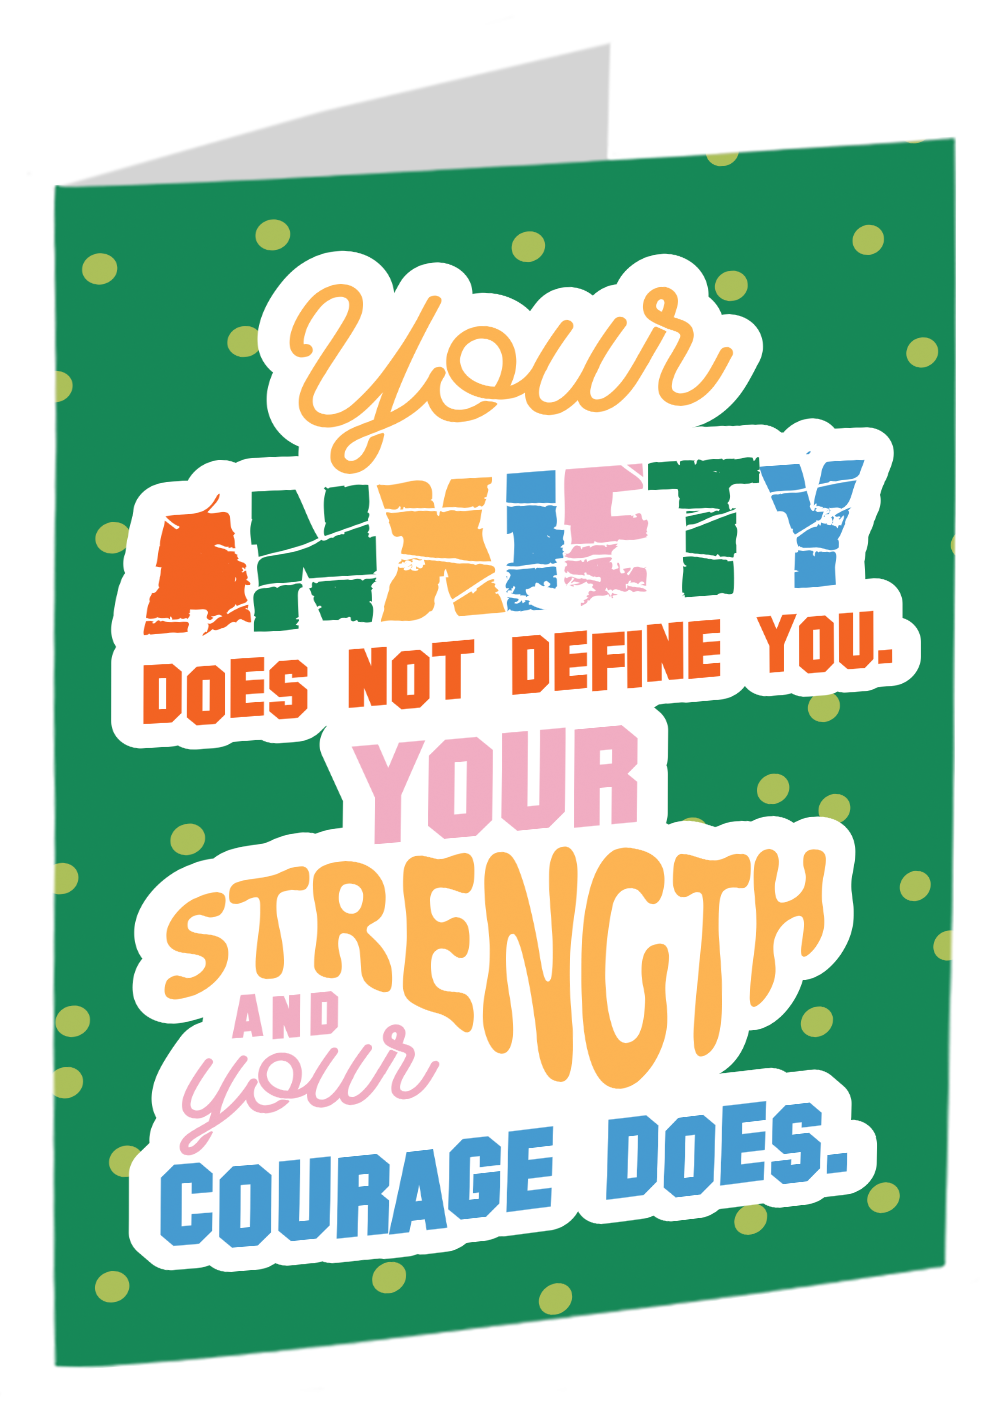 ANXIETY QUOTES: "Your anxiety does not define you - your strength and your courage does"